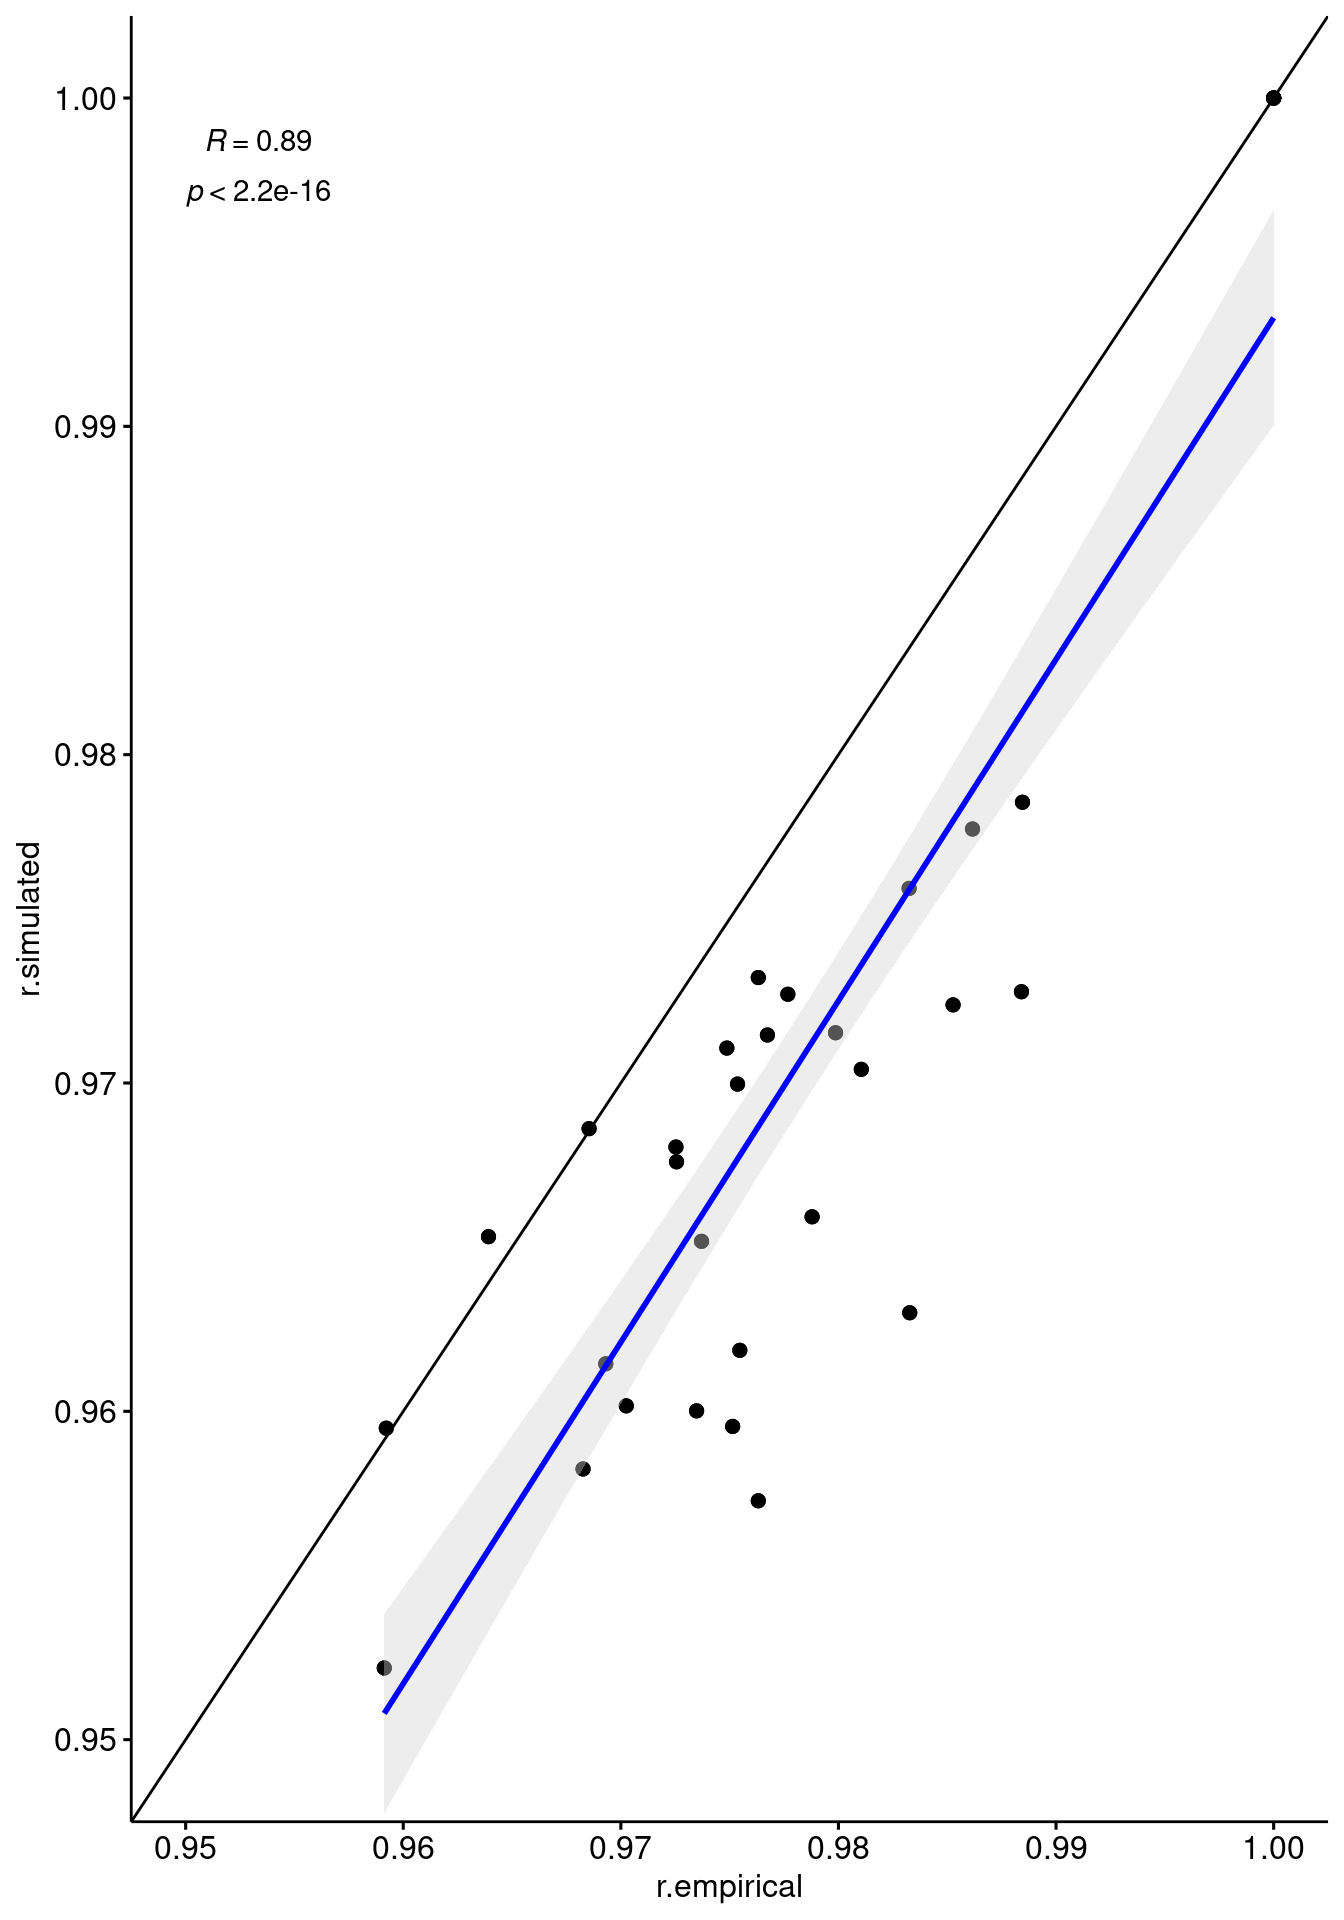 Comparison between the pairwise correlation in expression between pairs of individuals in the empirical (x-axis) and simulated (y-axis) data.